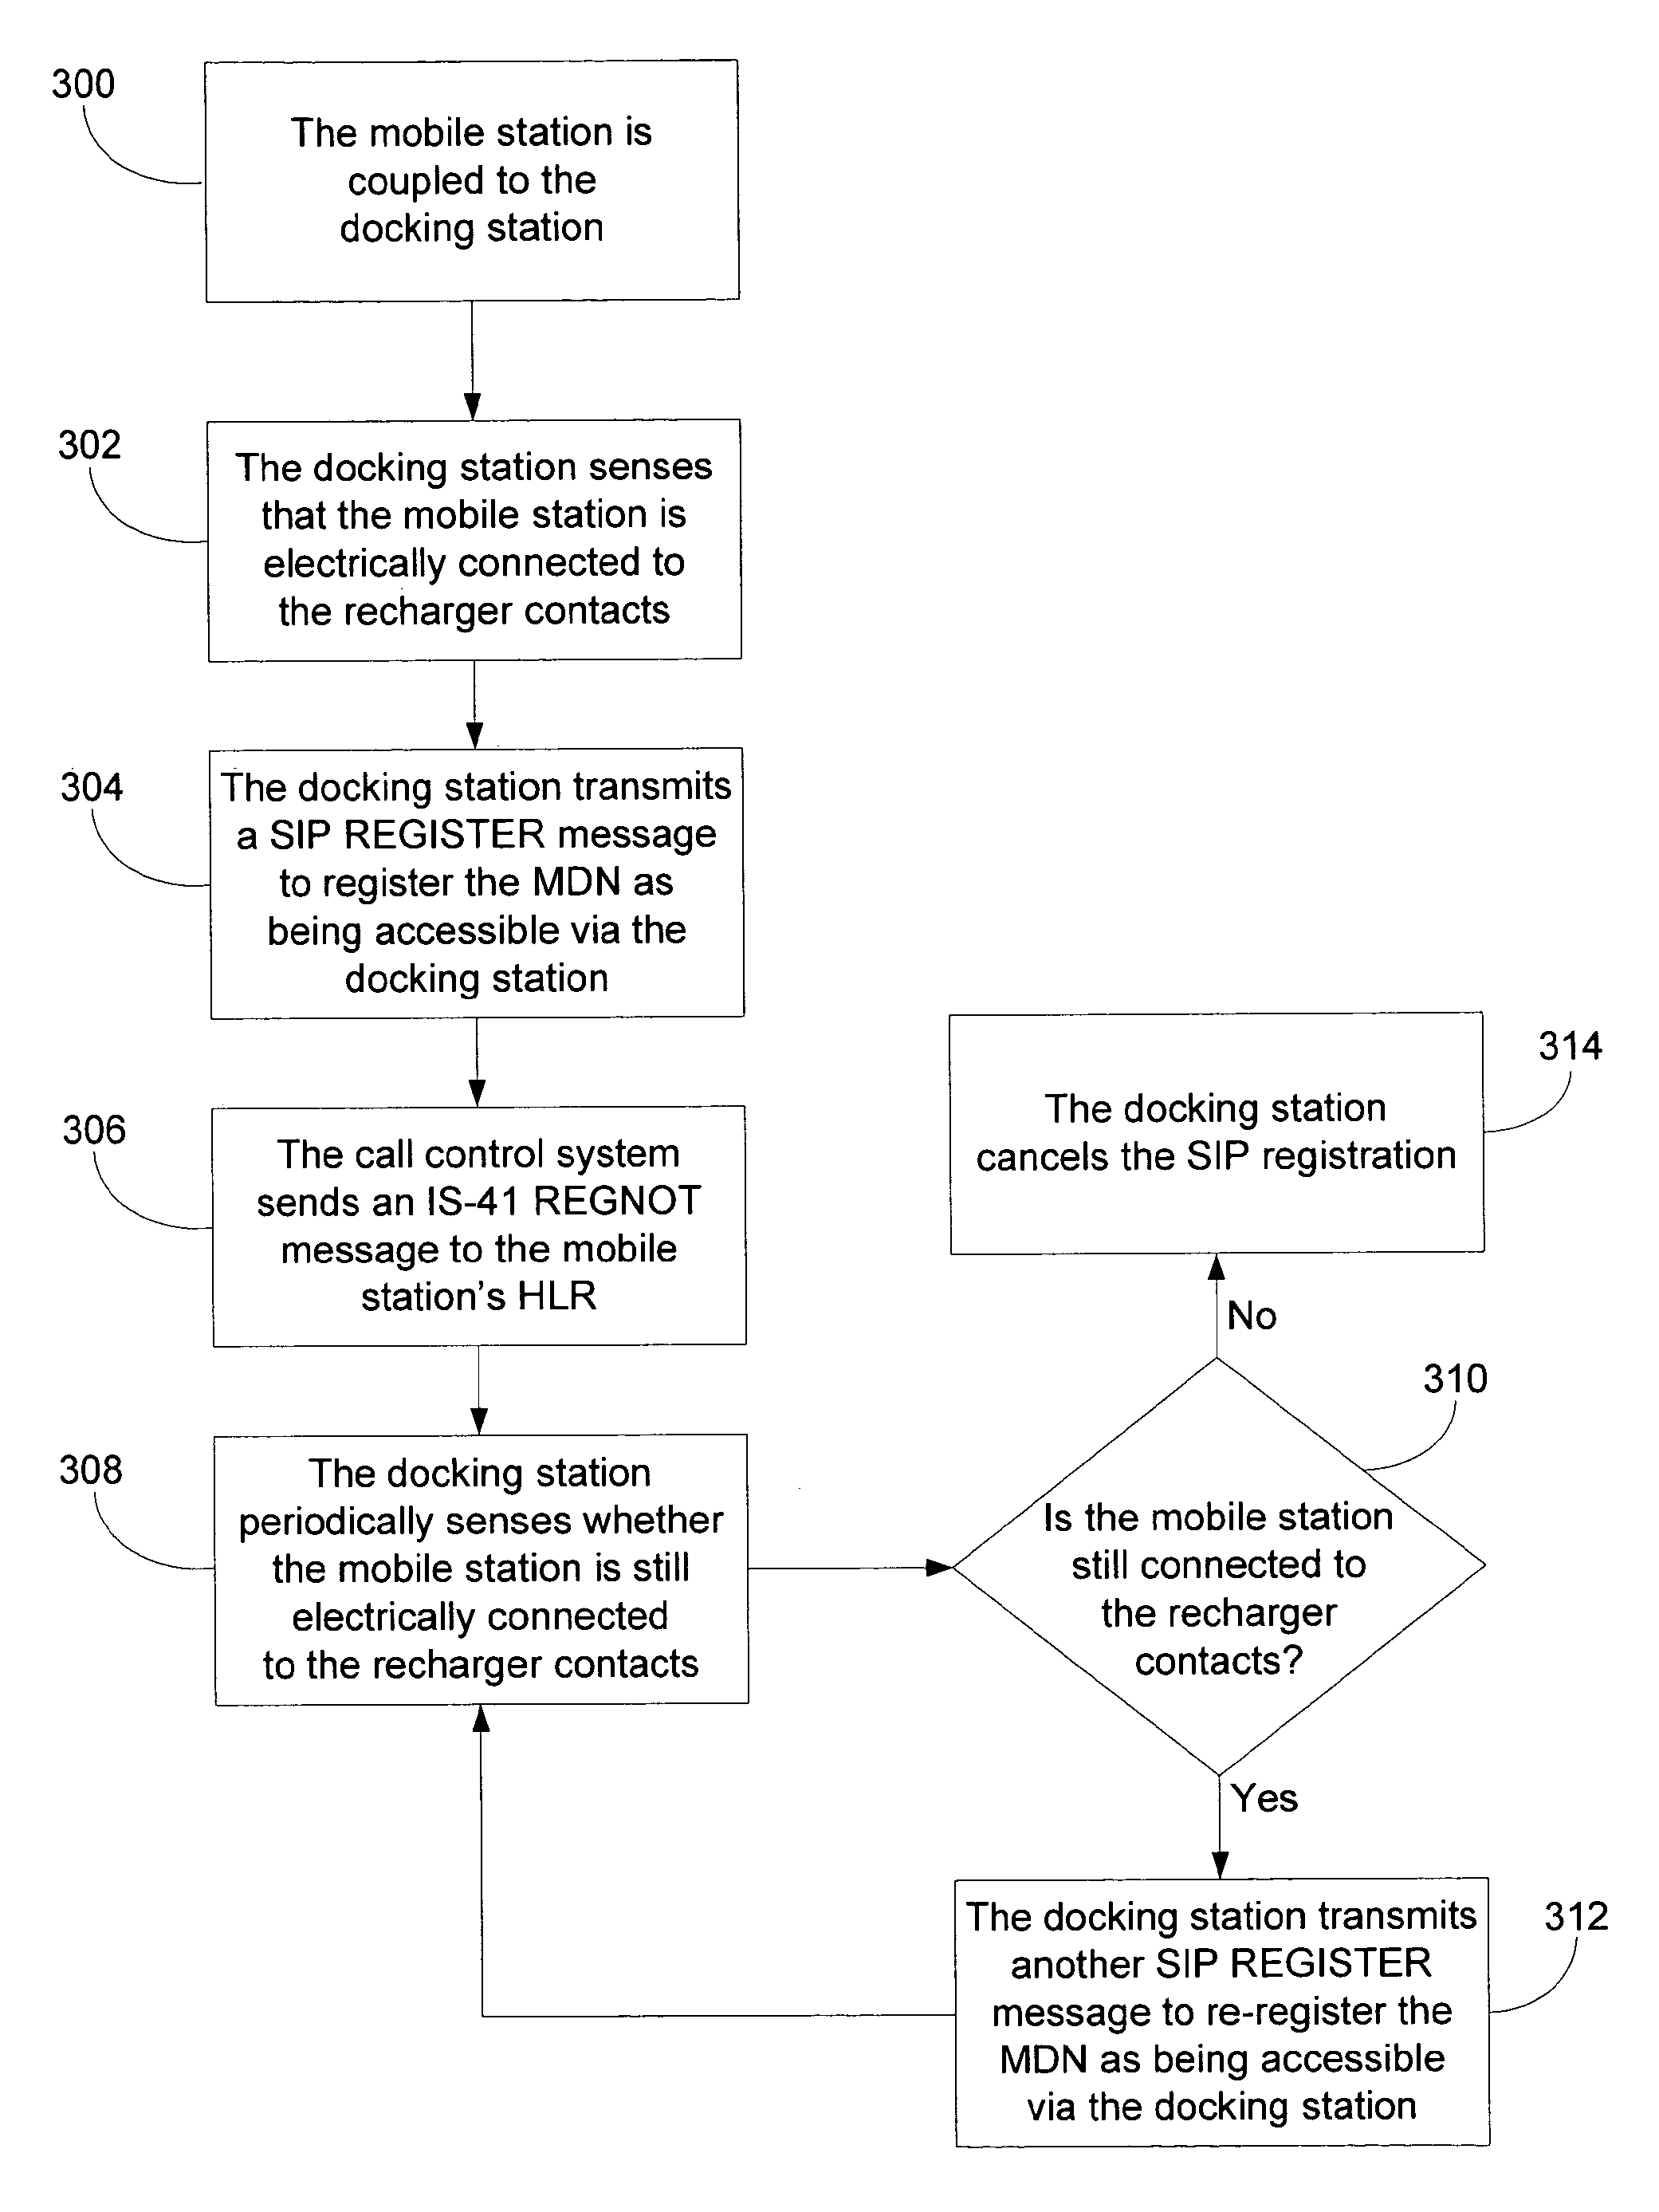 Method and System for Extending a Mobile Directory Number to a Landline-Based Voice-Over-Packet Network